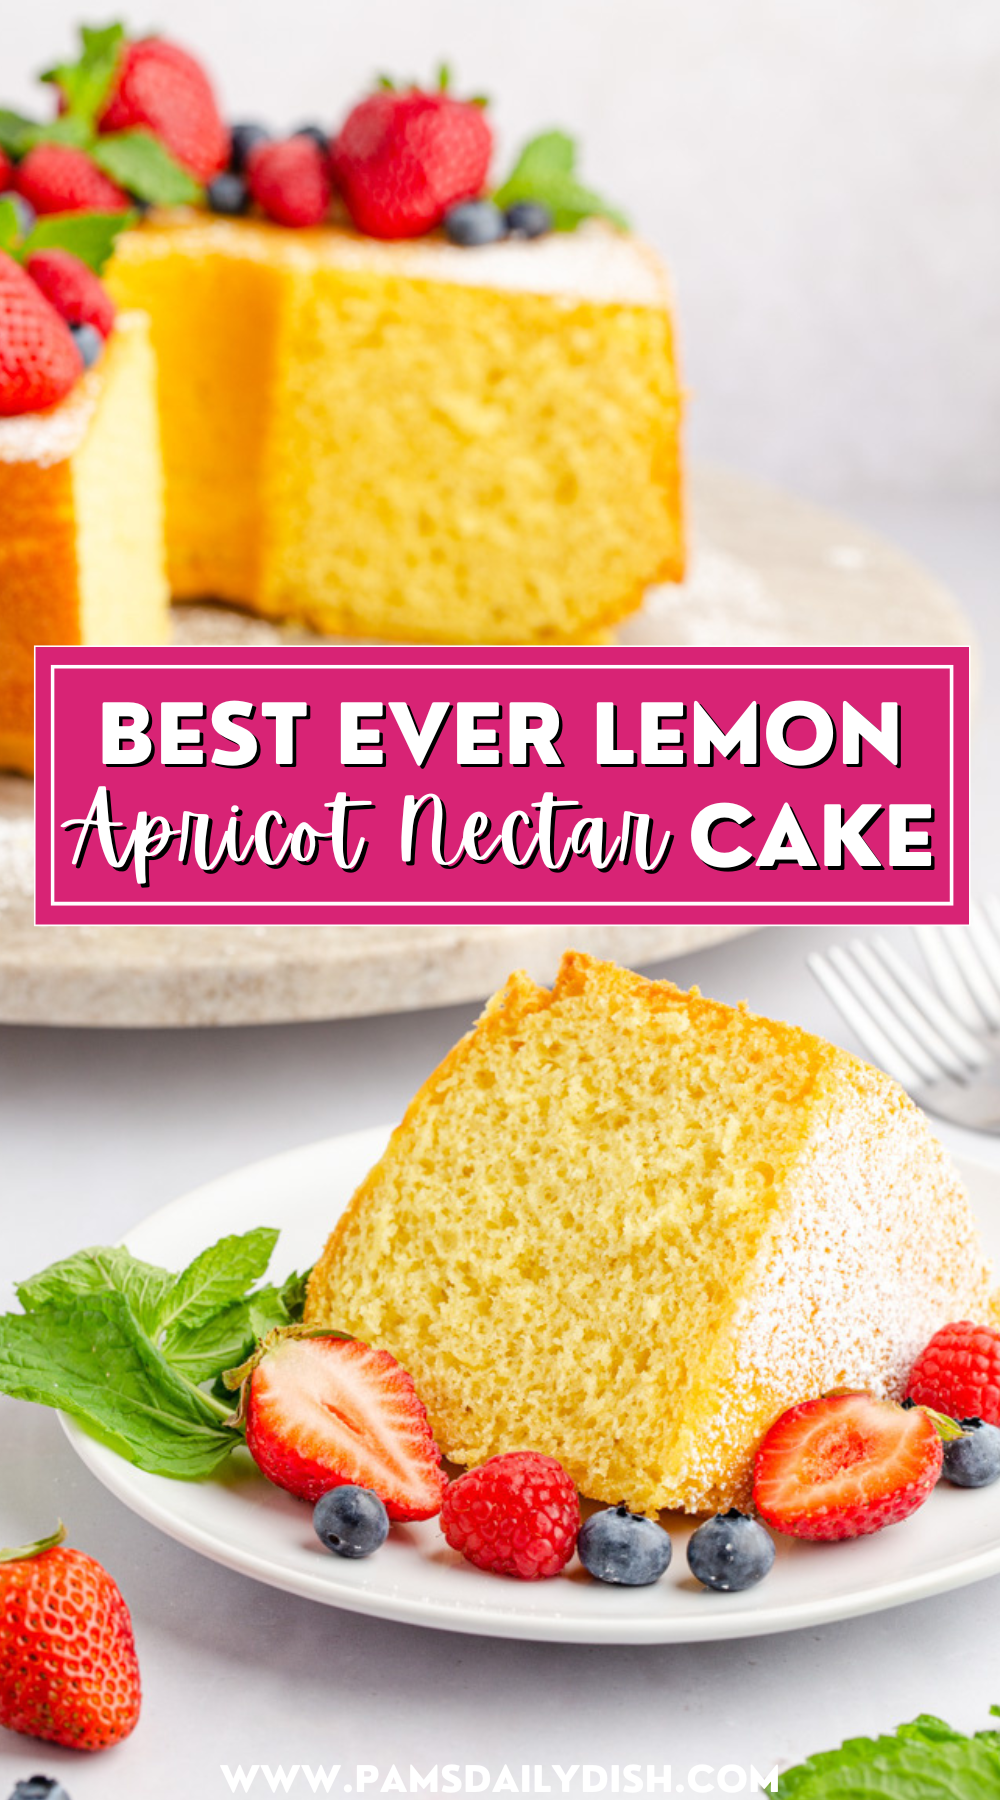 Marge's Lemon Nectarine Cake is the best dessert to make for all of your special occasions! It's a family favorite recipe that is bursting with flavor. It's so easy to make by just using a boxed cake mix and a handful of simple ingredients. You'll wish you made this sweet summer treat sooner! via @skinnydesserts